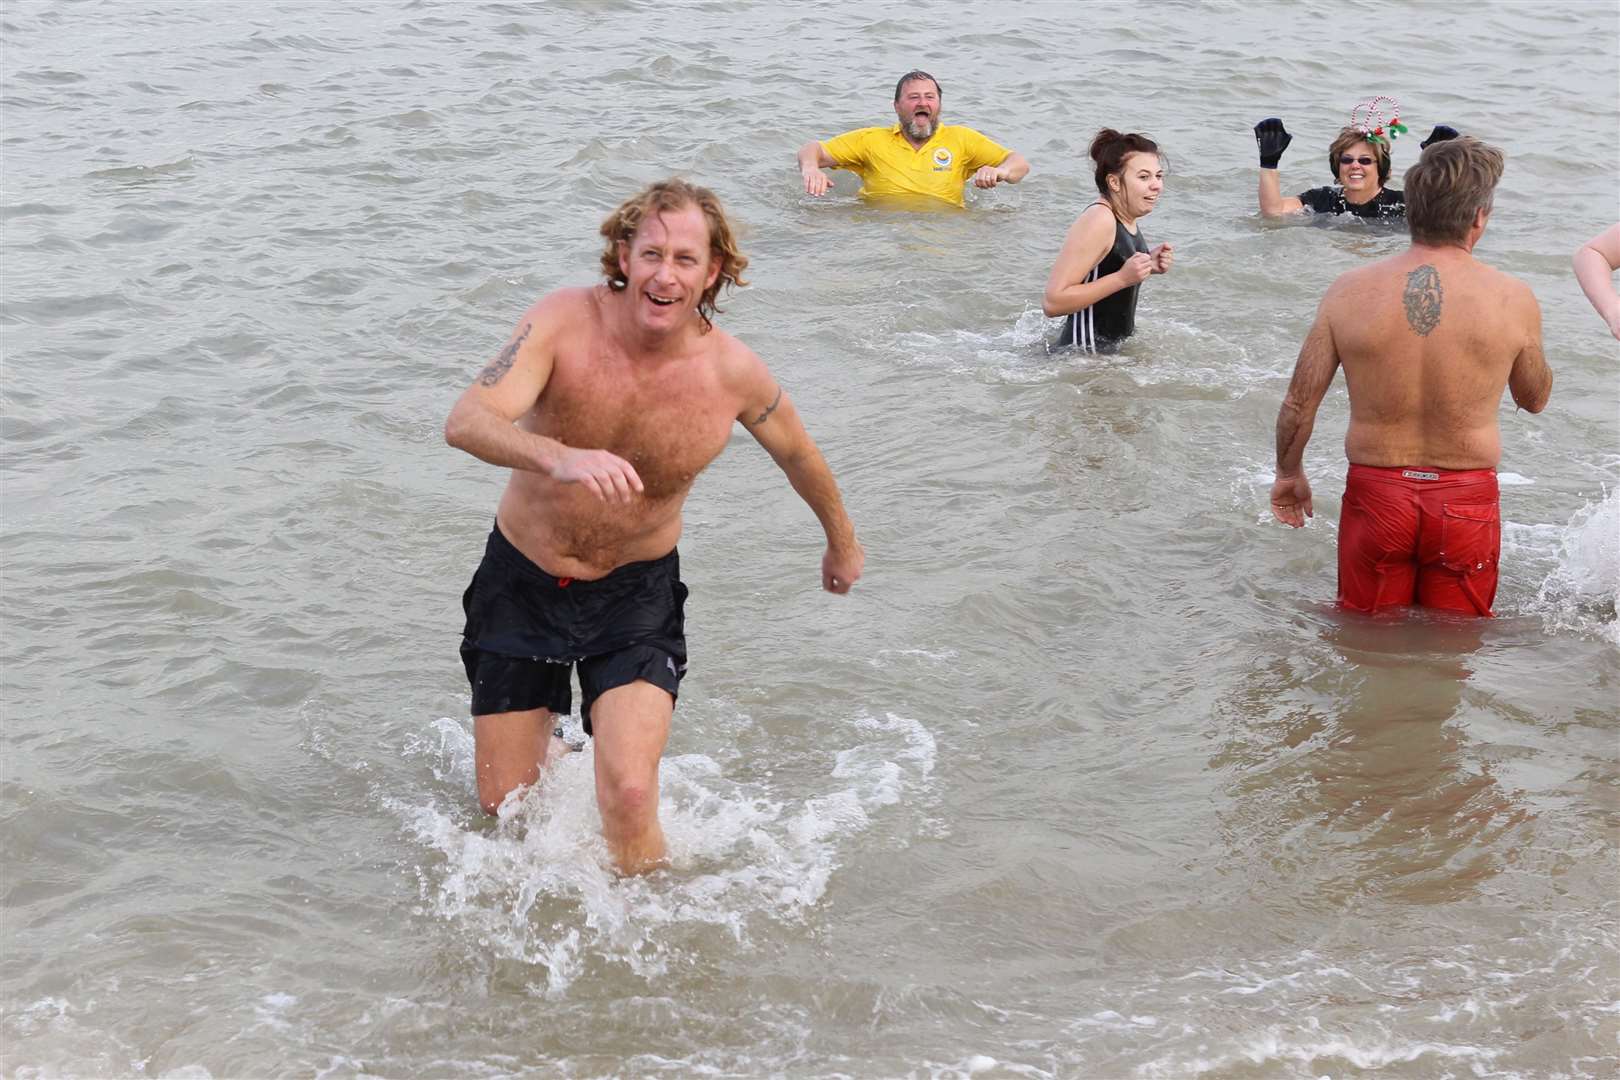 Sheerness seafront Ian Arnell is no stranger to a sea dip himself. Picture: John Westhrop